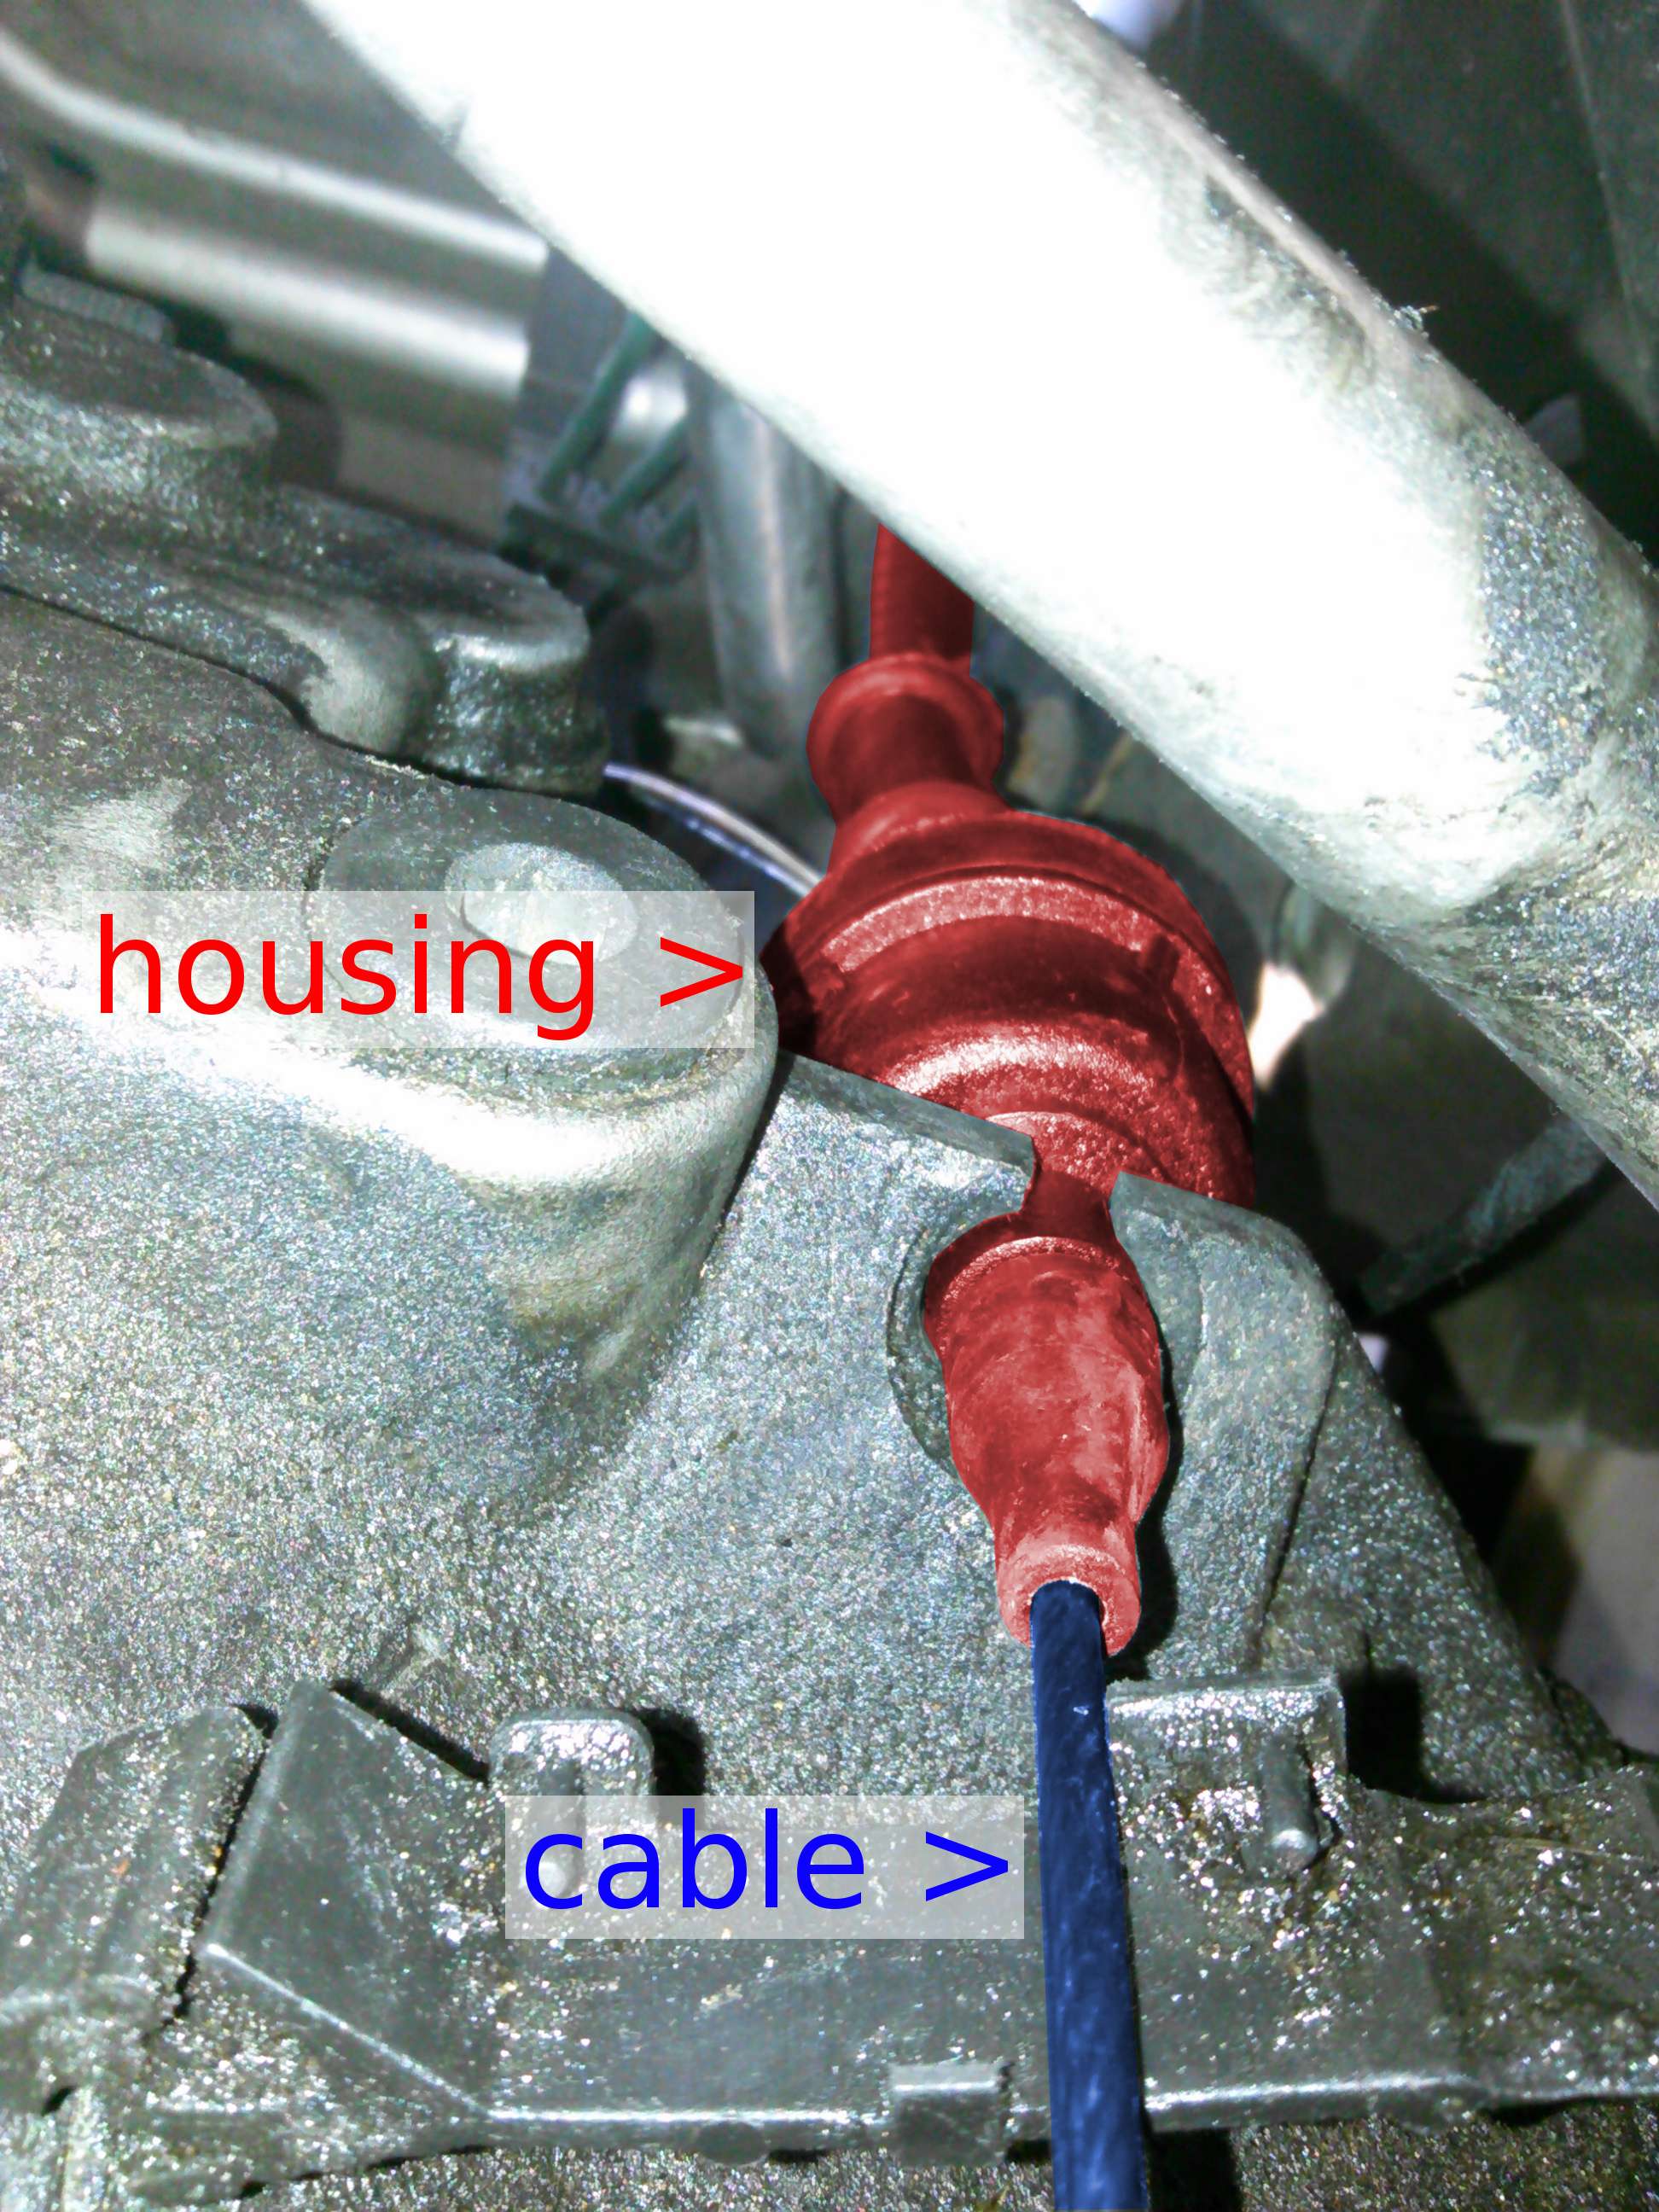 An image showing where the cable enters the housing